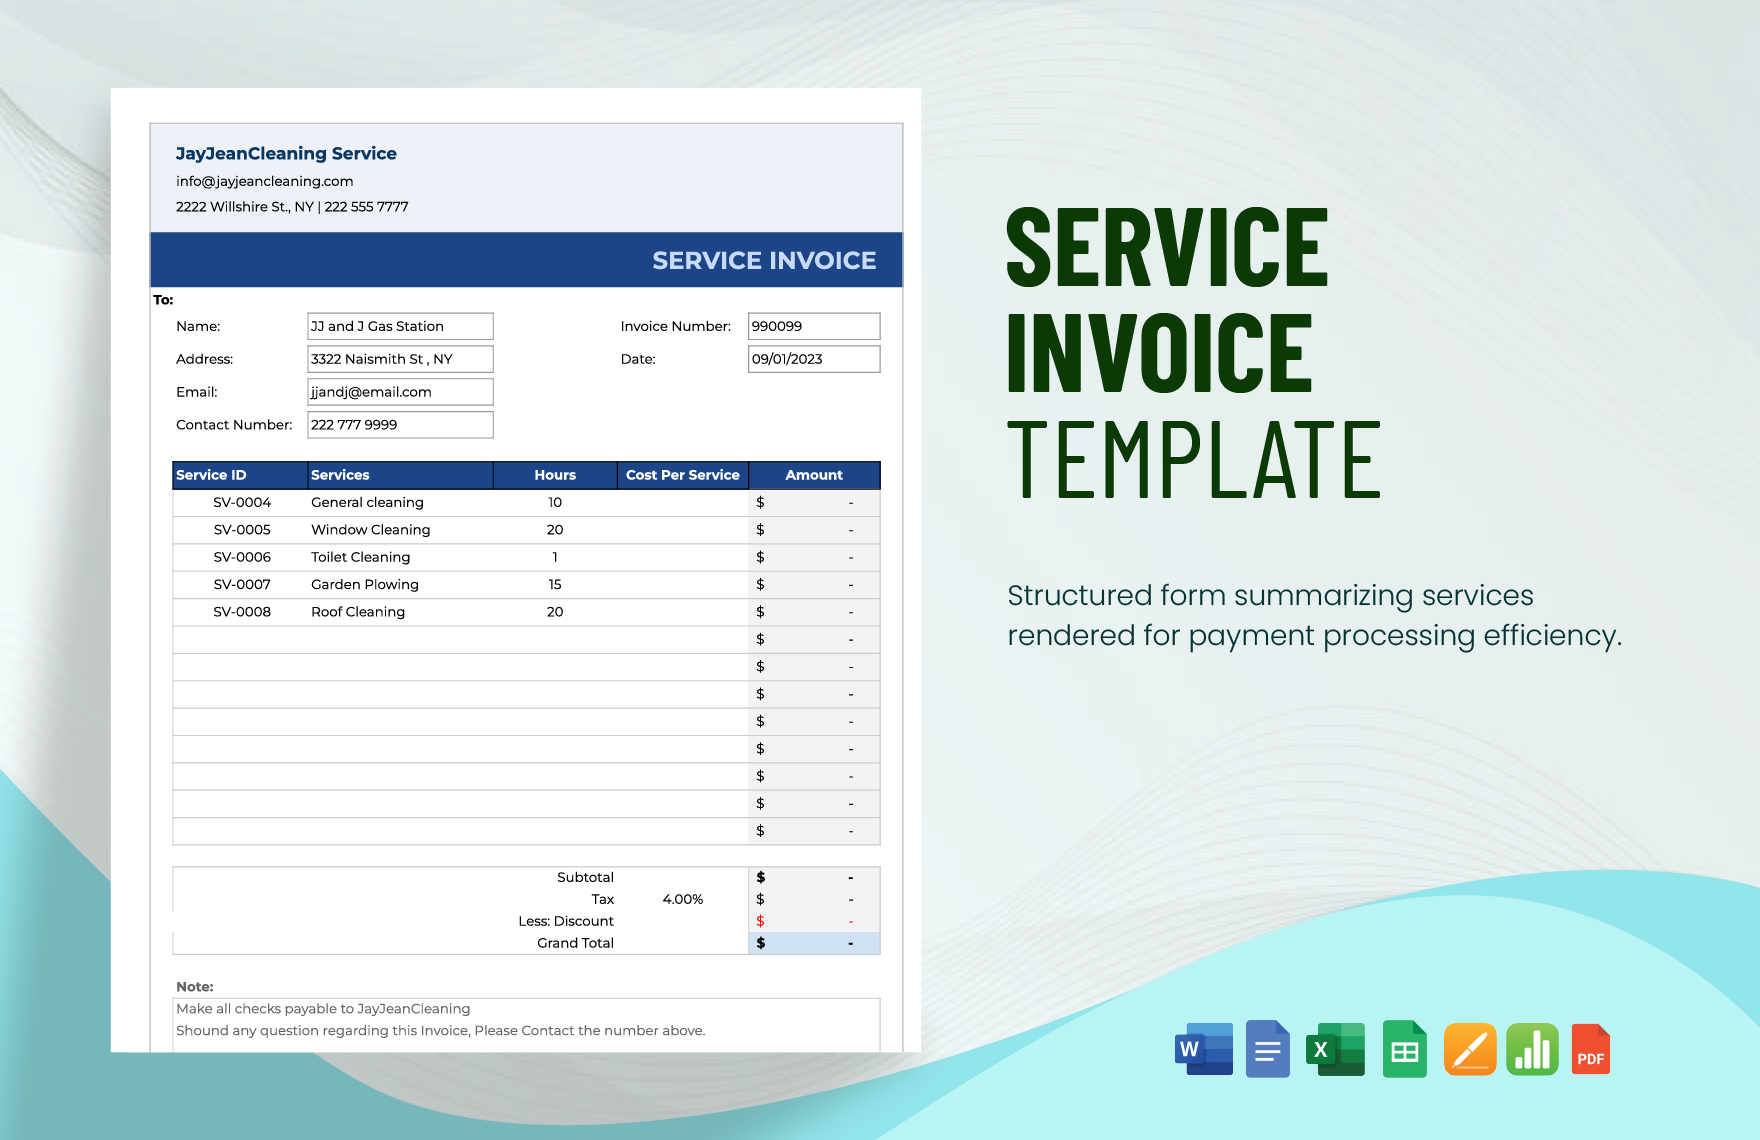 Service Invoice Template in Word, Google Docs, Excel, PDF, Google Sheets, Apple Pages, Apple Numbers